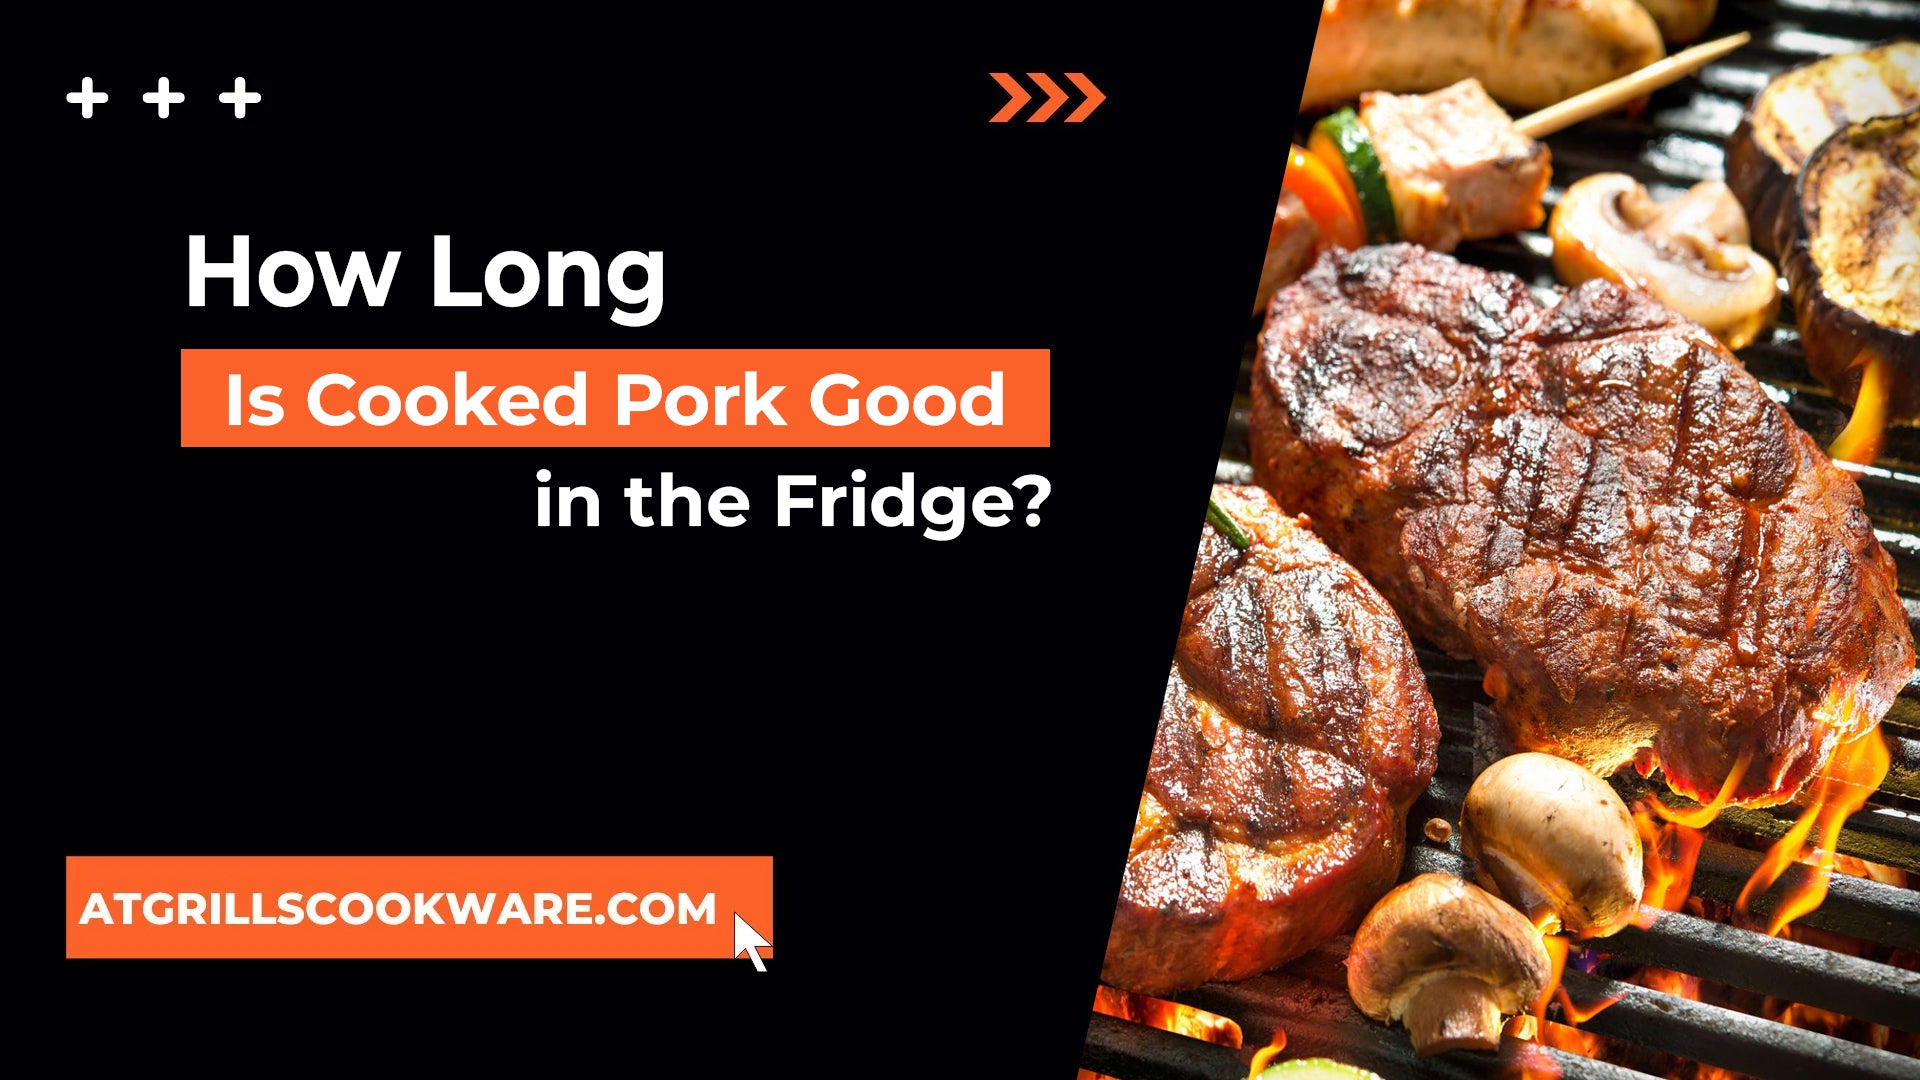 How Long Is Cooked Pork Good in the Fridge - atgrillscookware